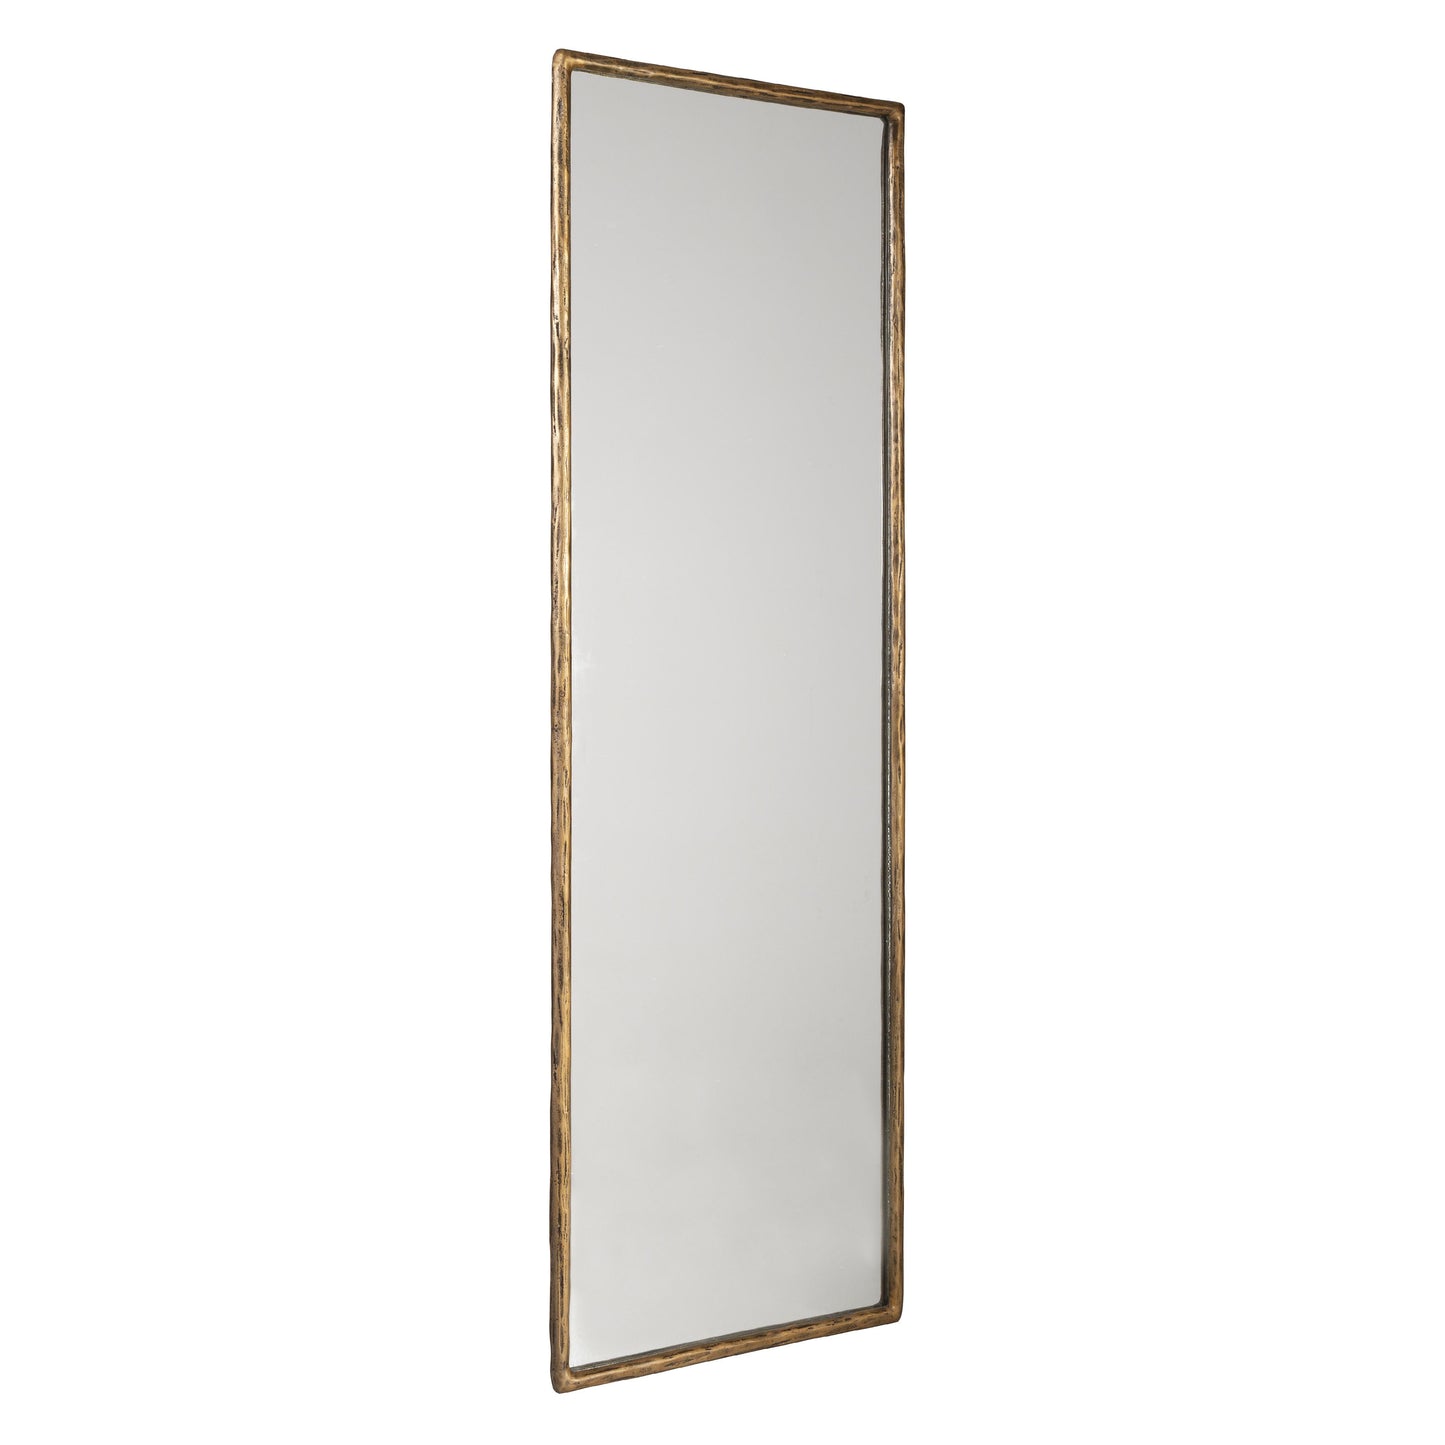 Signature Design by Ashley Ryandale Floorstanding Mirror A8010265 IMAGE 1